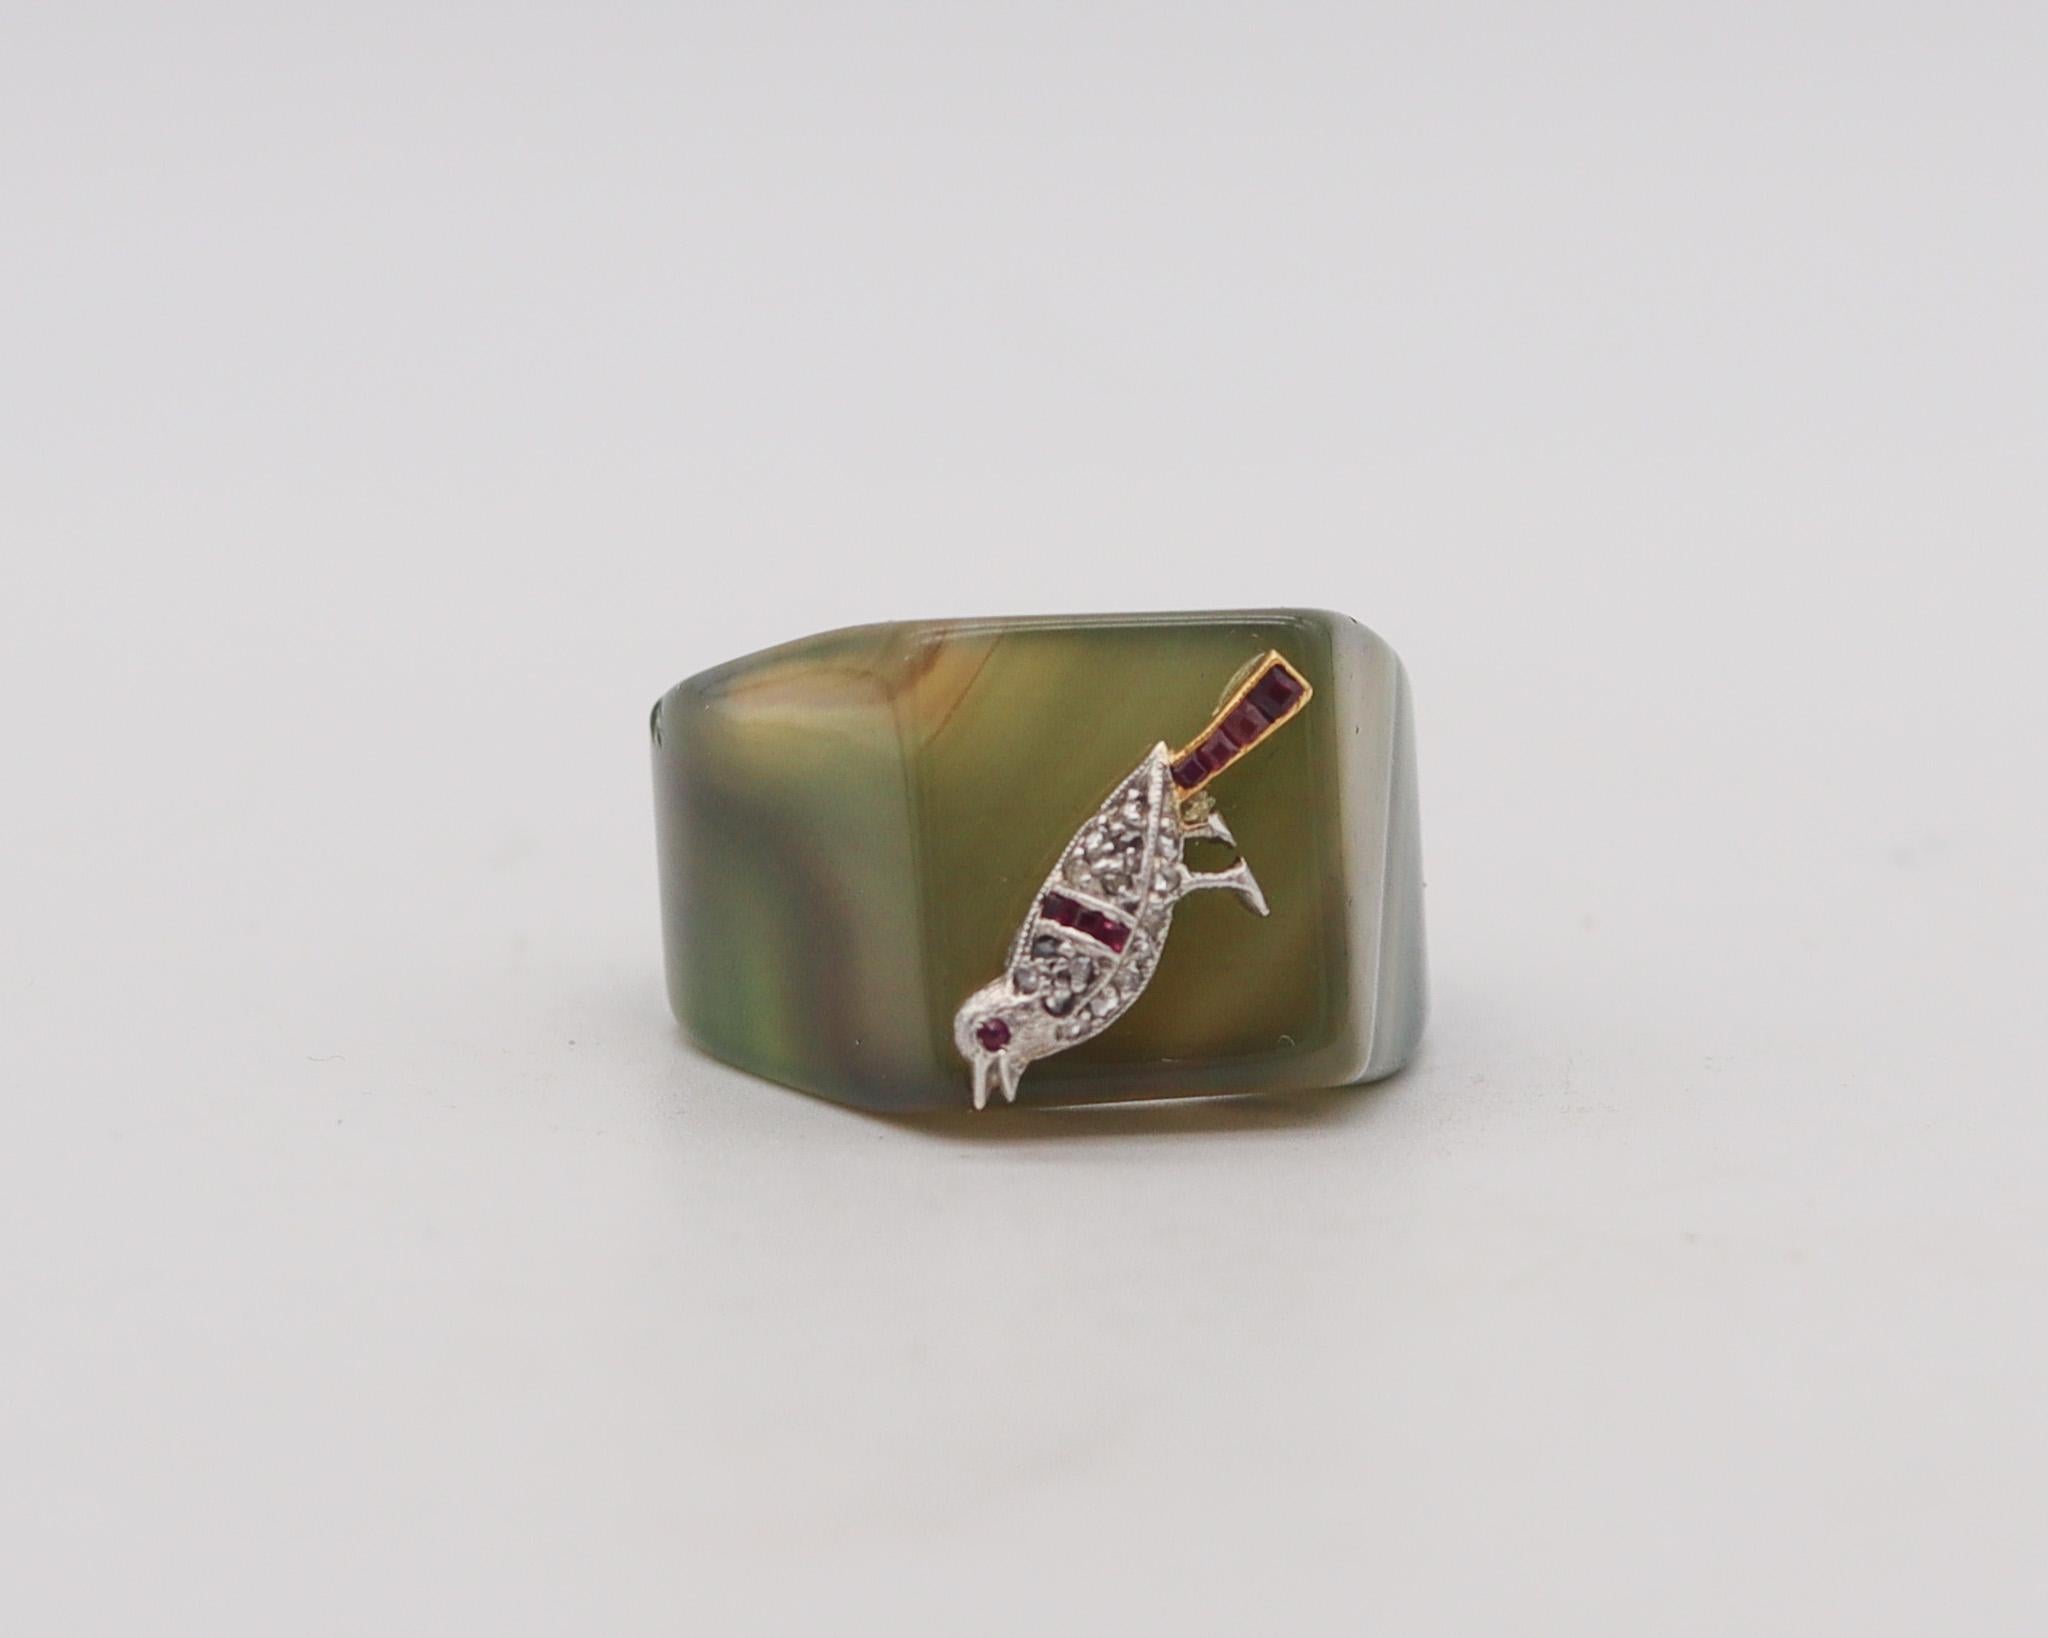 An art deco carved agate ring with a stylized pigeon.

Very handsome and unusual cocktail ring, created during the art deco period, back in the 1925. This ring is made up from a carved single piece of greenish agate and a pigeon crafted in solid